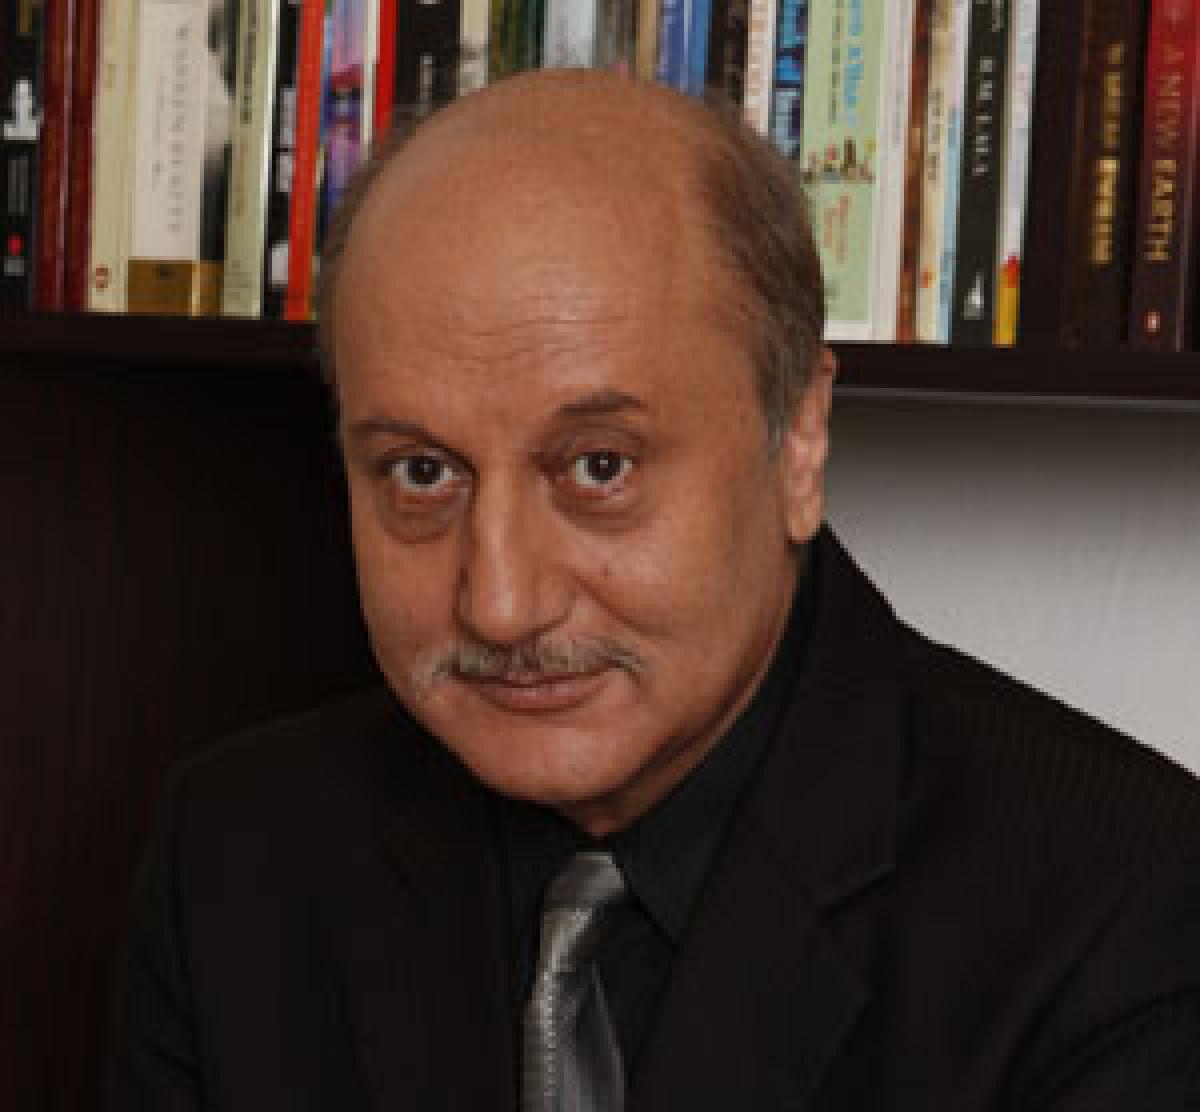 Modi is the most abused person: Anupam Kher